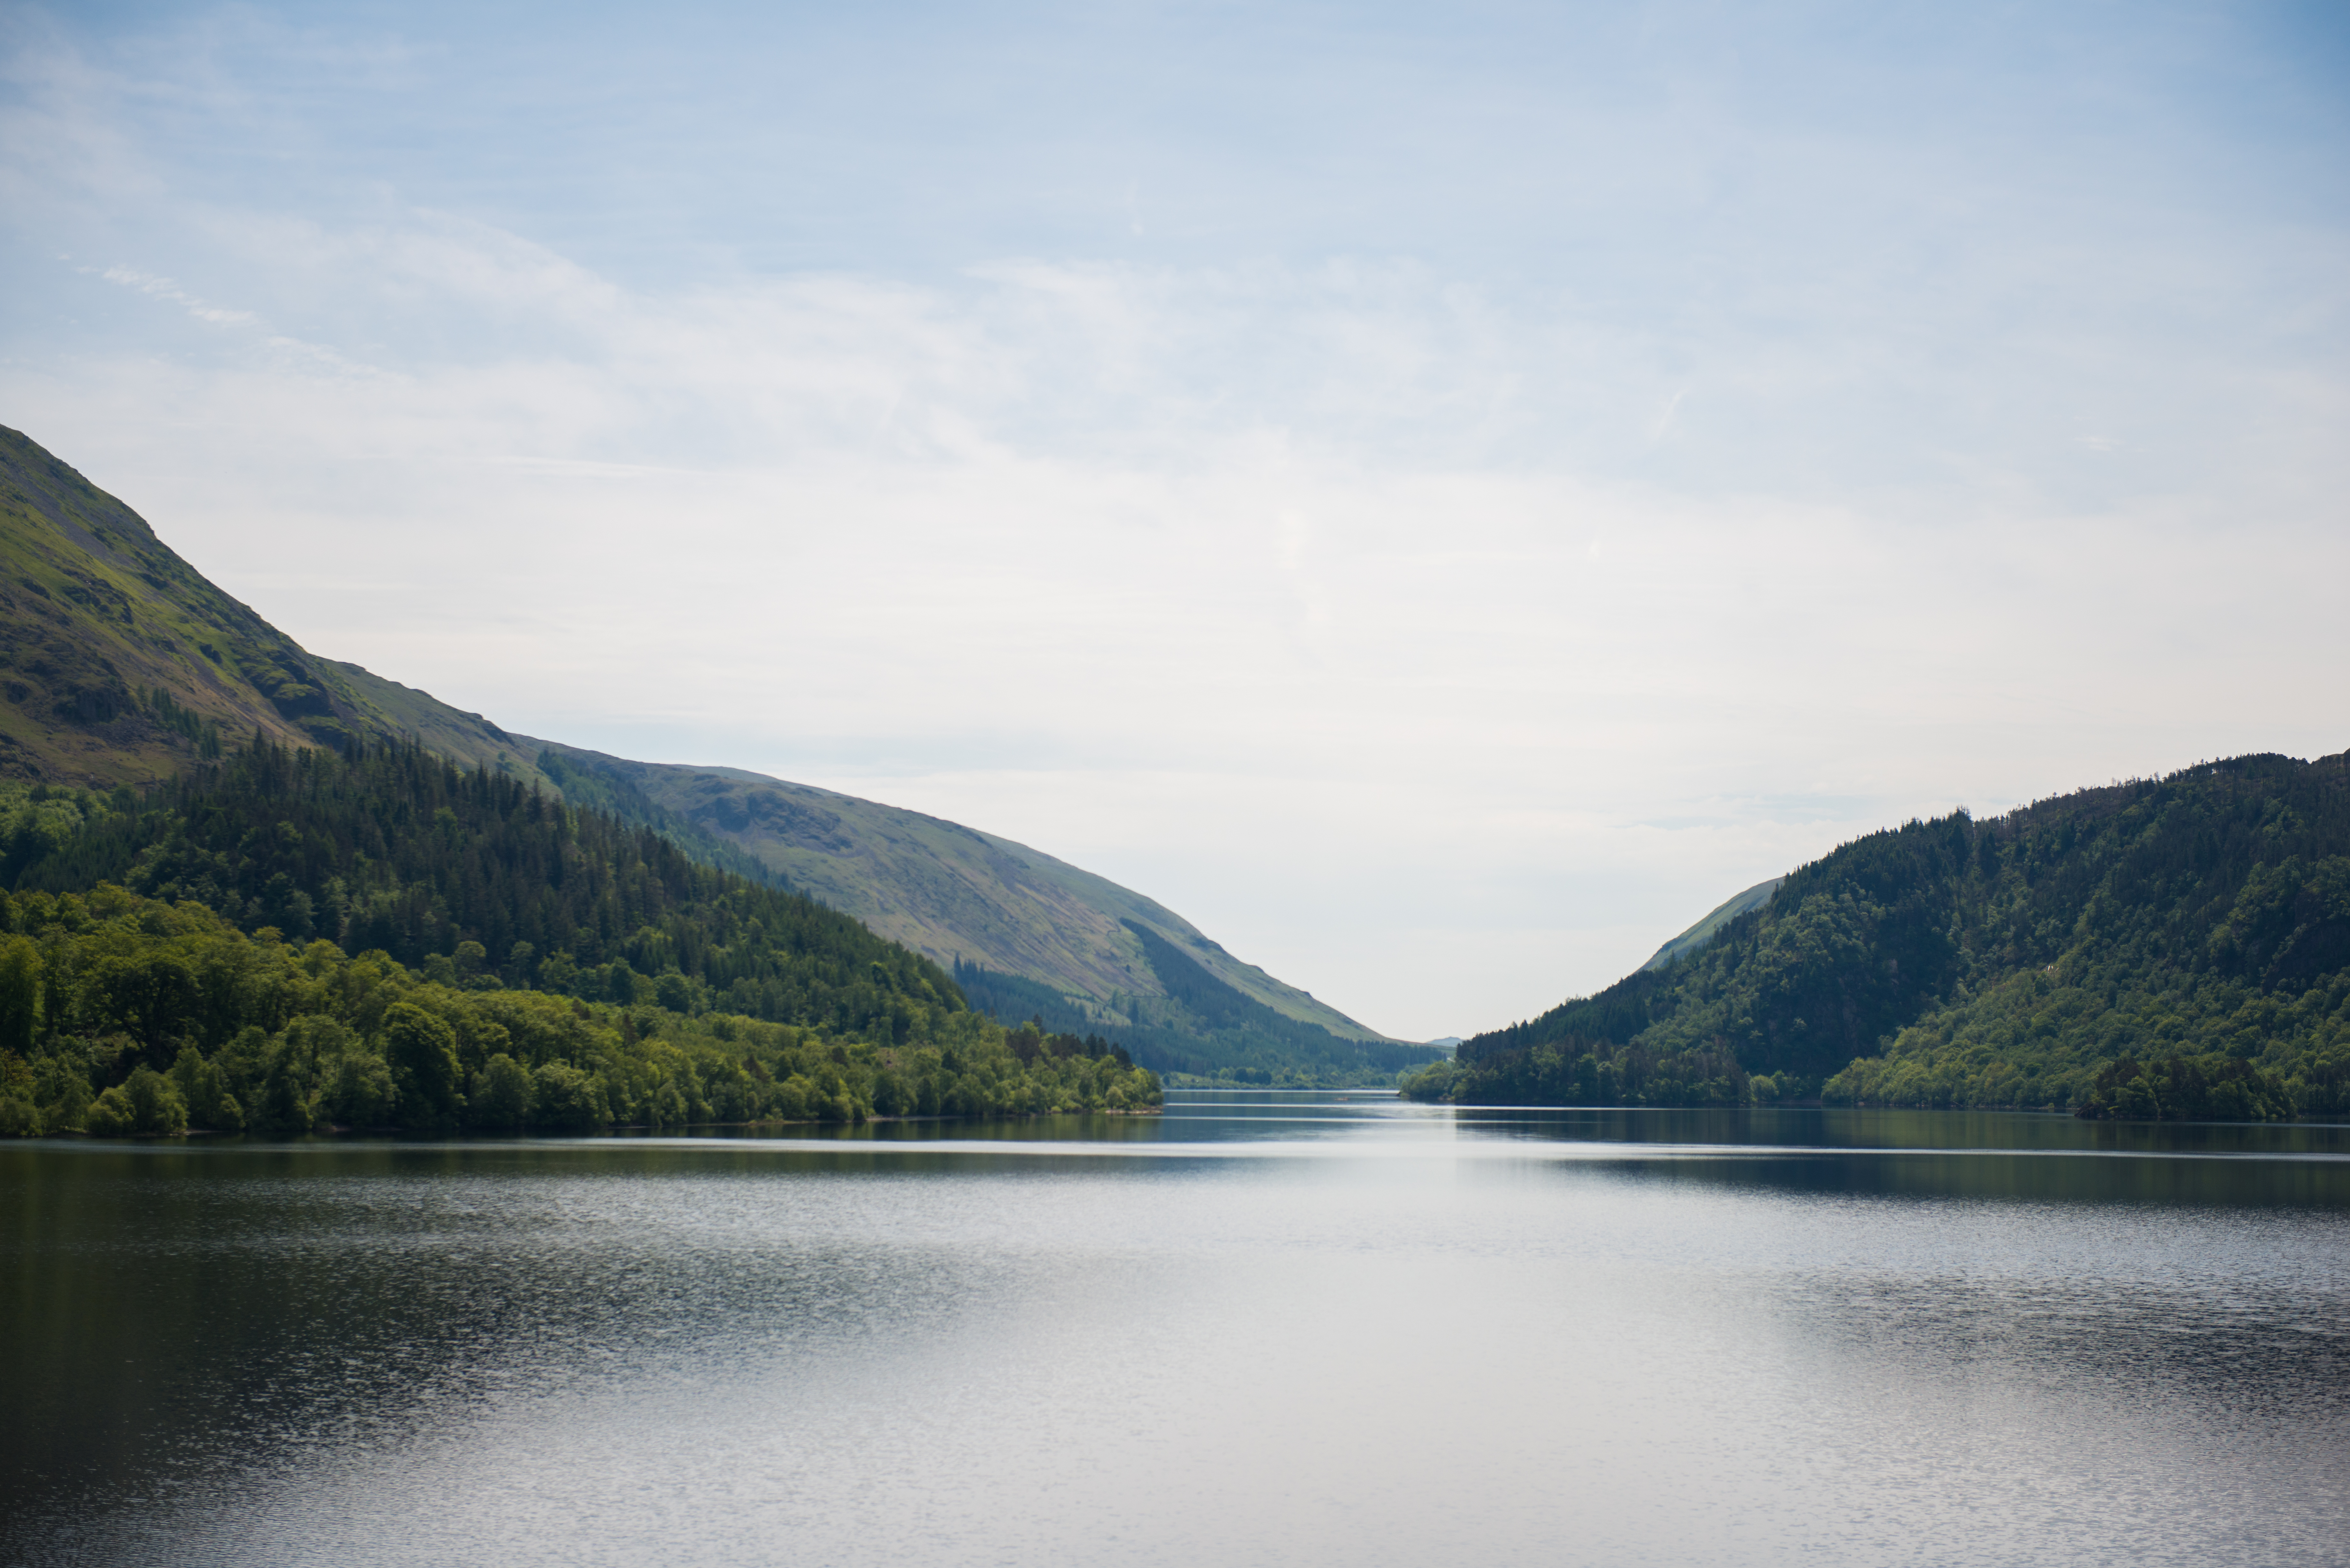 Thirlmere, the Lake District National Park - location for Star Wars scenes